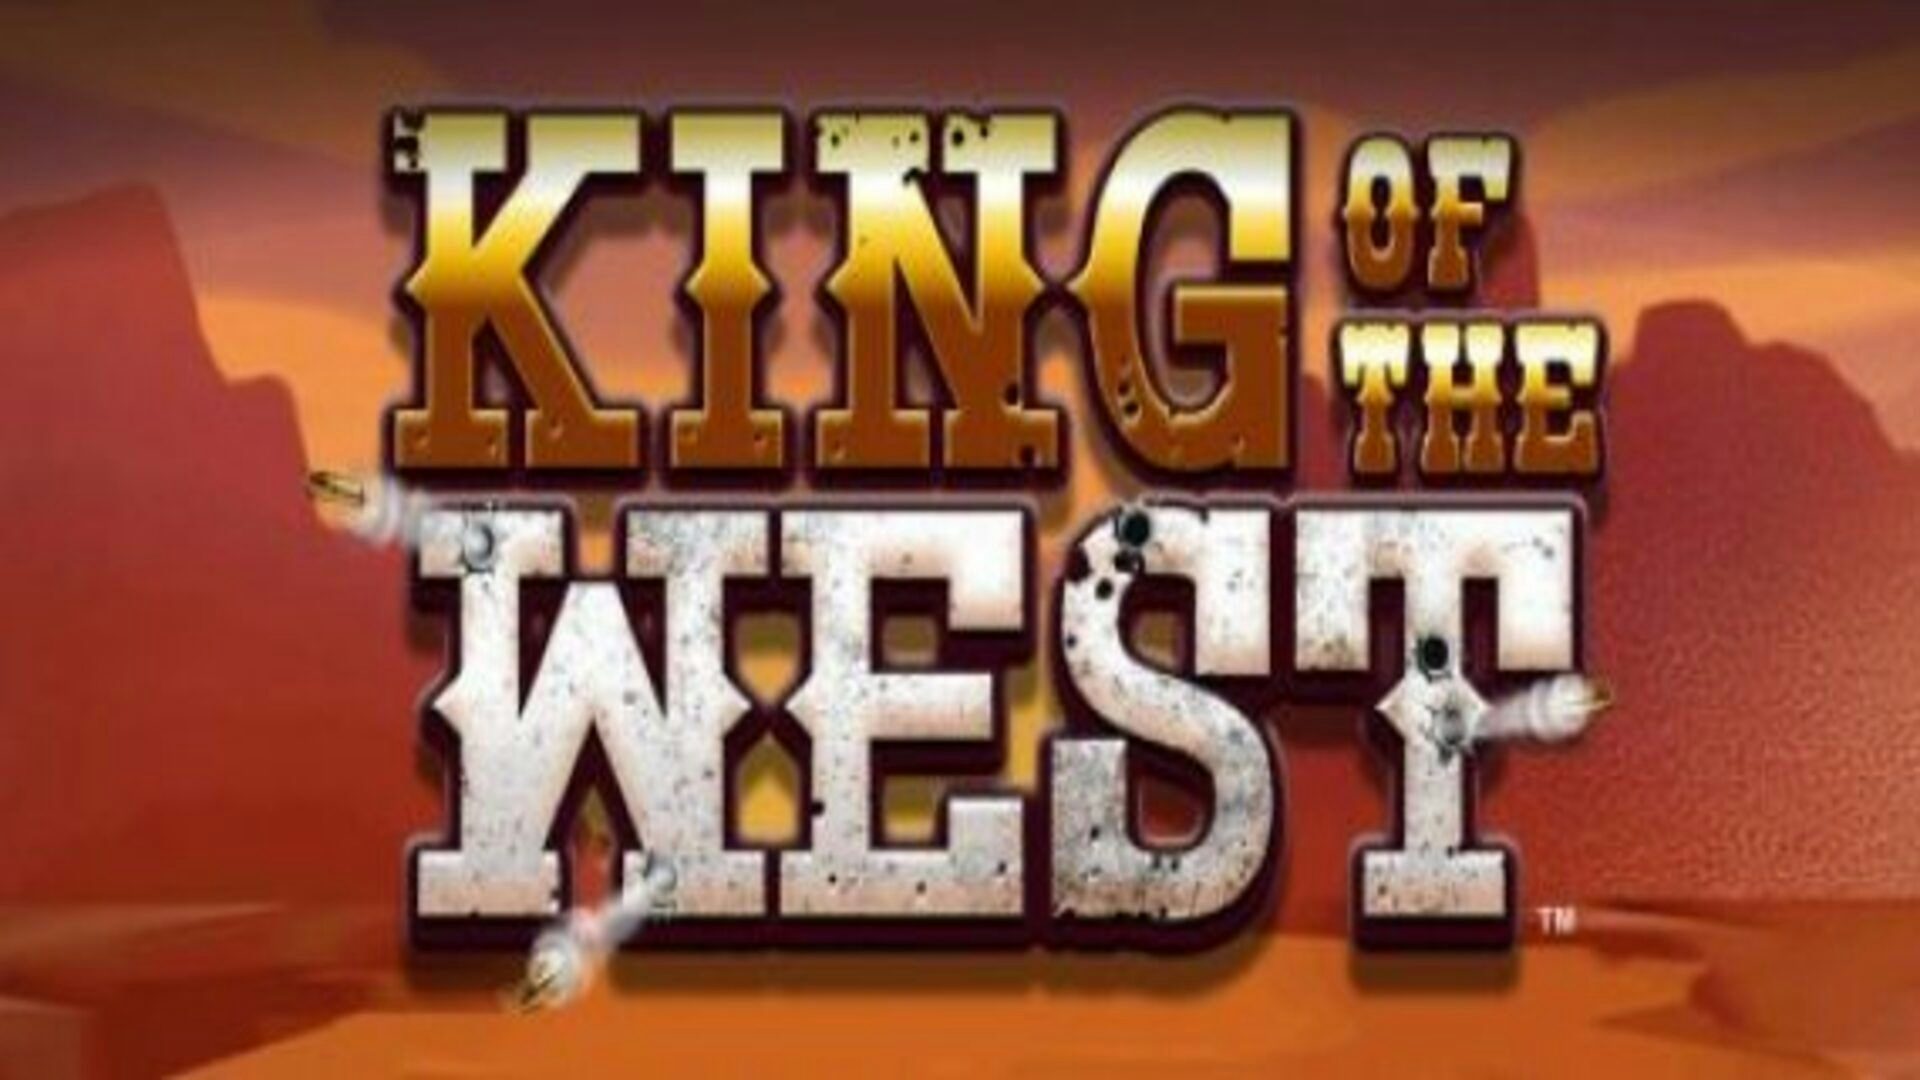 King of the West